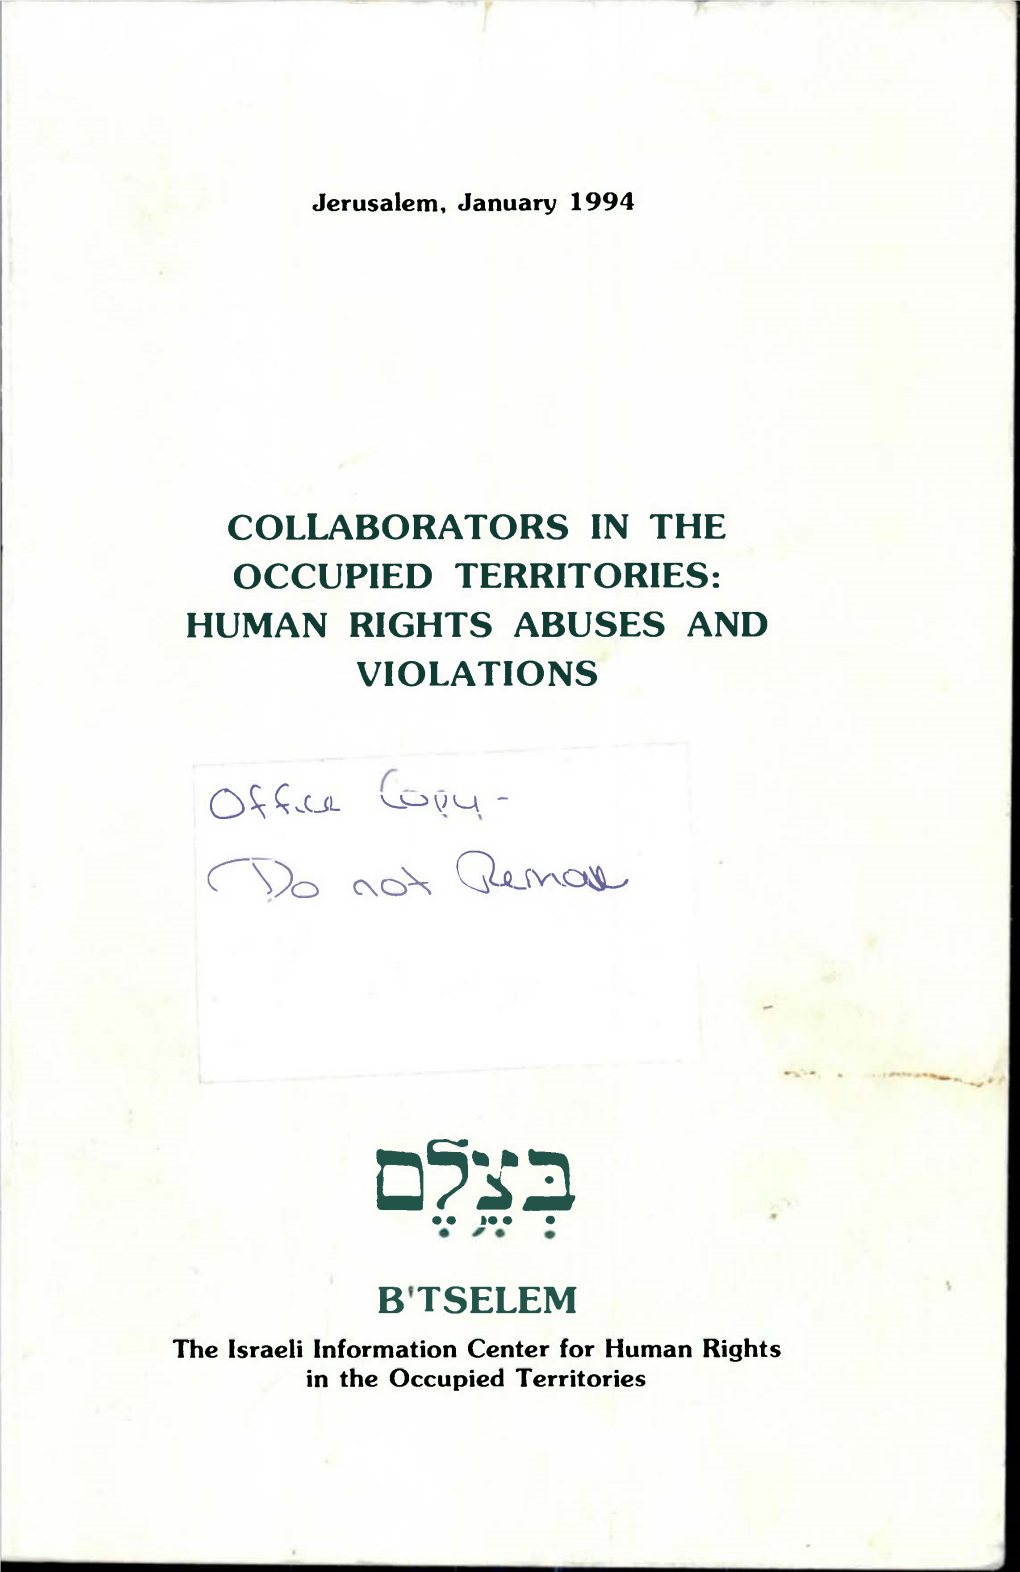 B'tselem Report: "Collaborators in the Occupied Territories: Human Rights